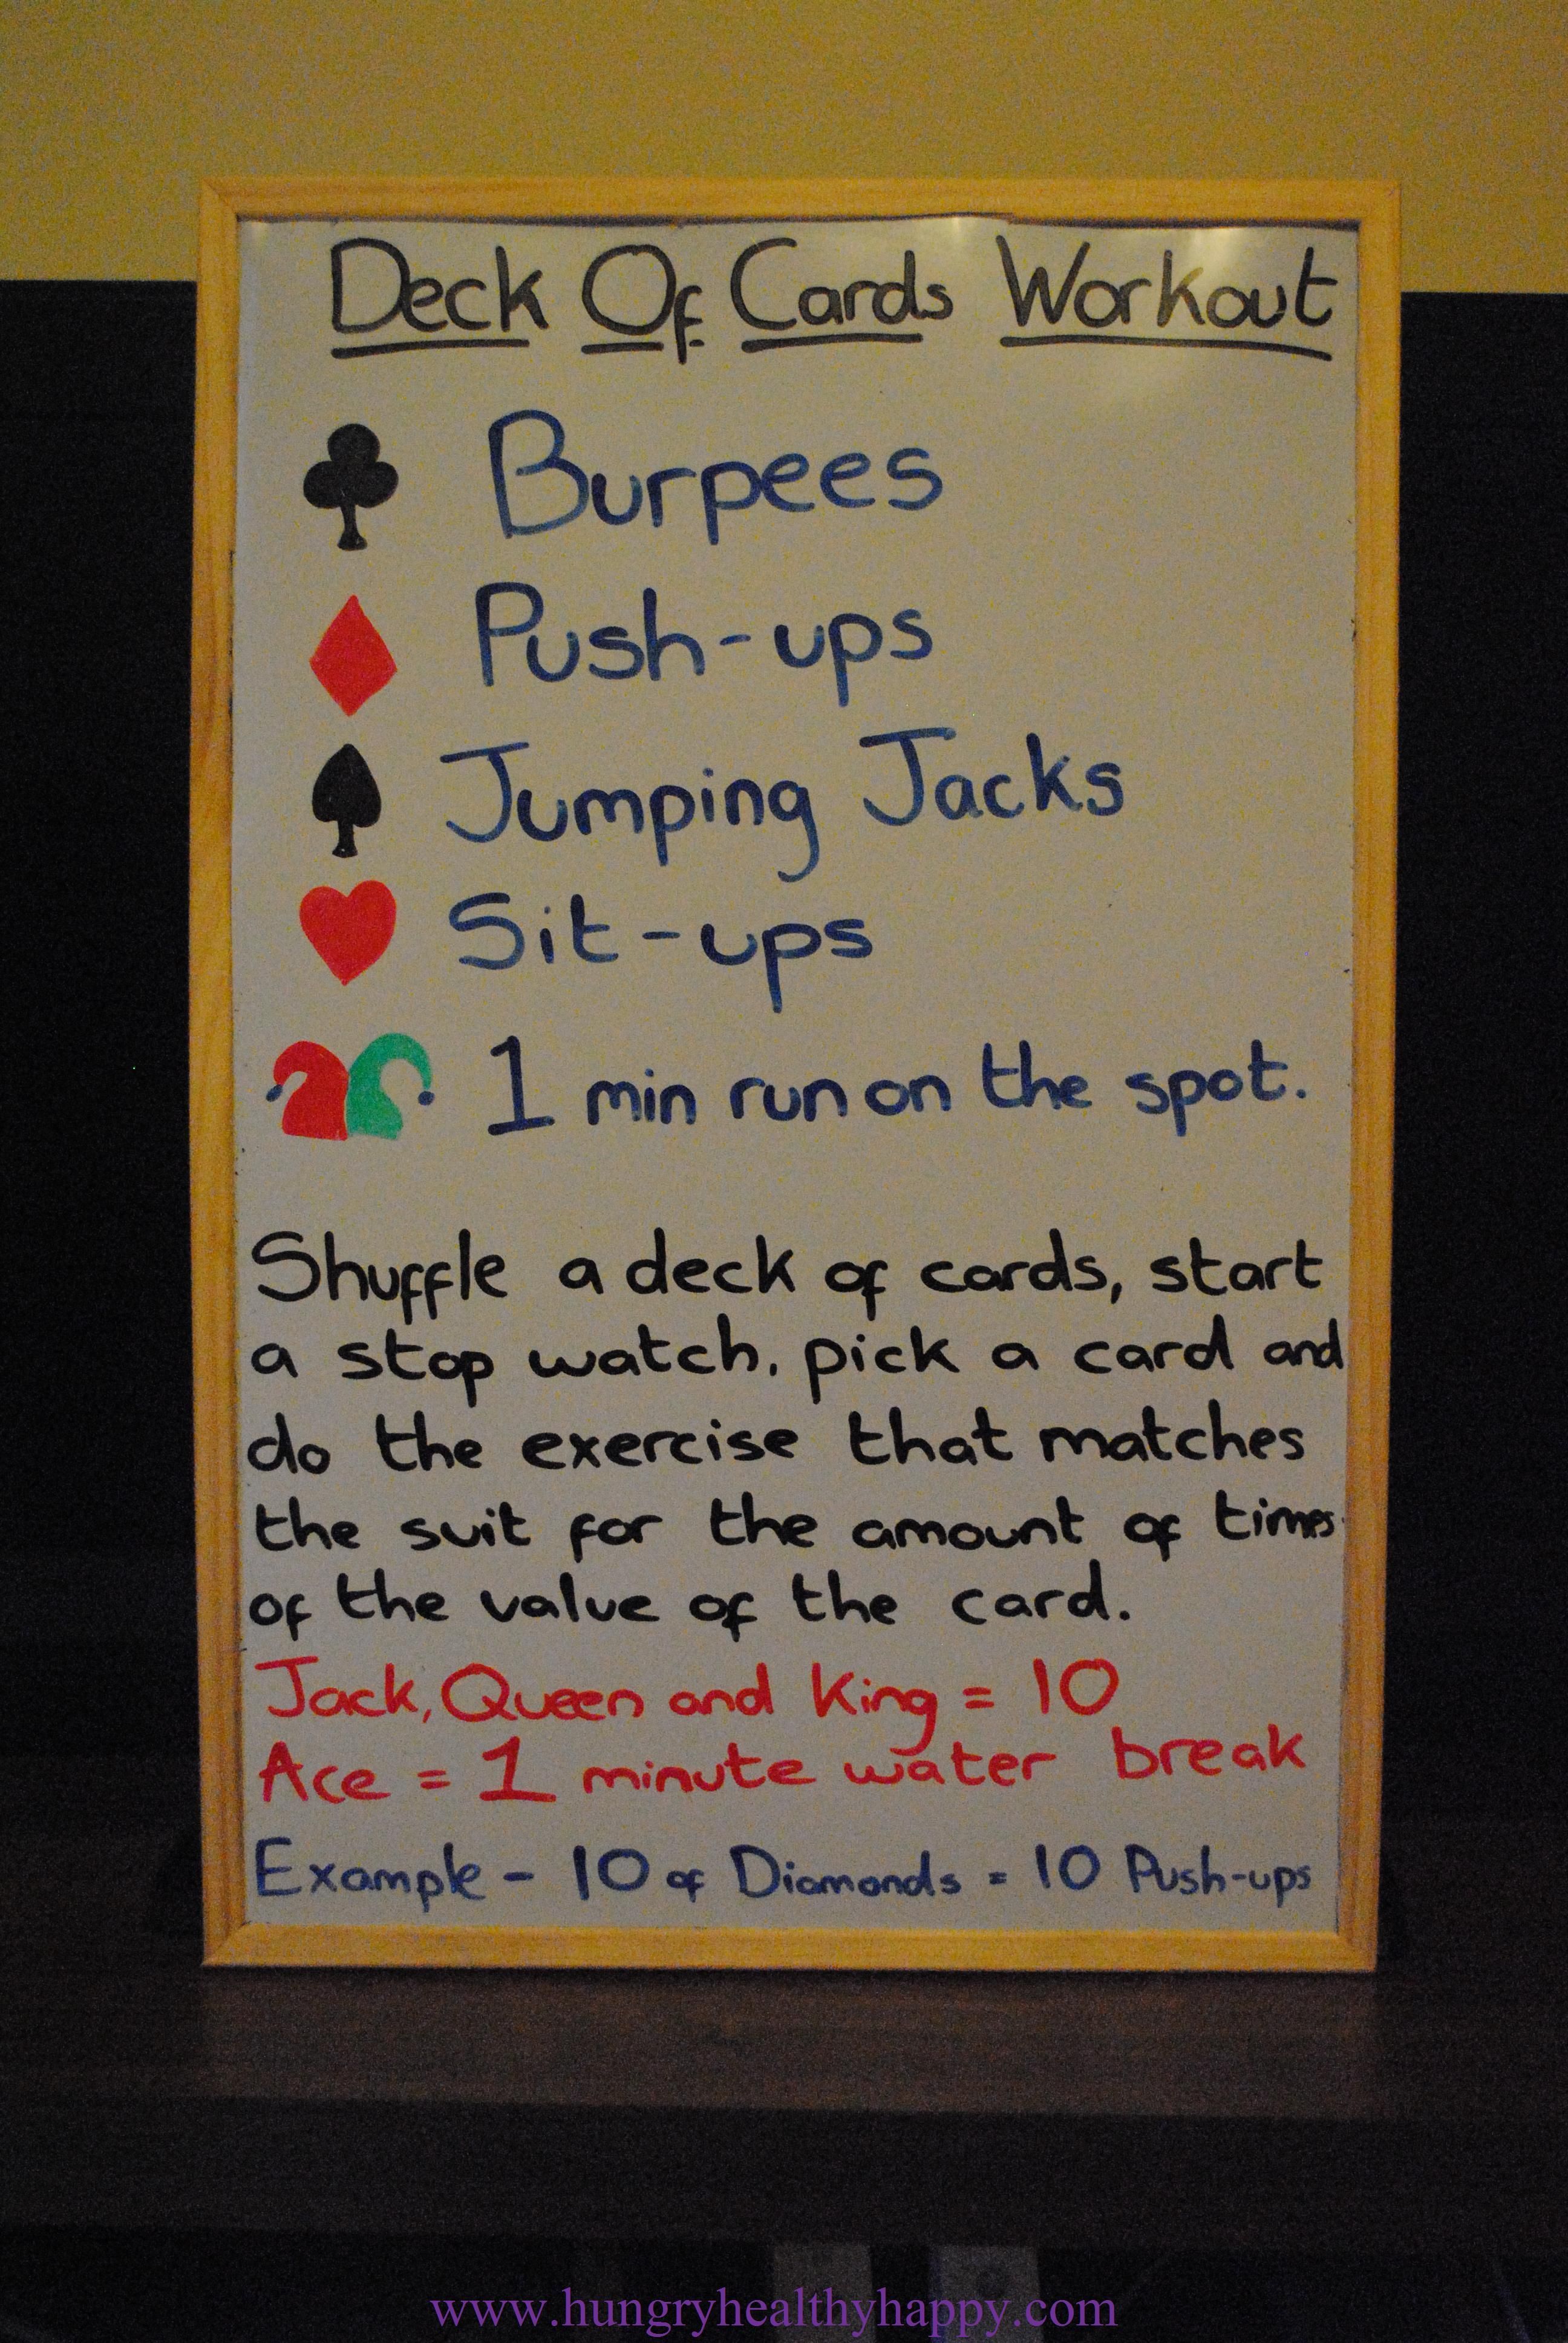 Deck of cards workout. LOVE doing this. Take a deck of cards and designate exercises to the suite depending on your fitness level. Pull a card and do that many reps as on the car. For jacks, queens, kings and aces...toss in some cardio! from jumping jacks, to the treadmill, elliptical, rowing machine, or jump rope. -   23 fitness design exercise
 ideas